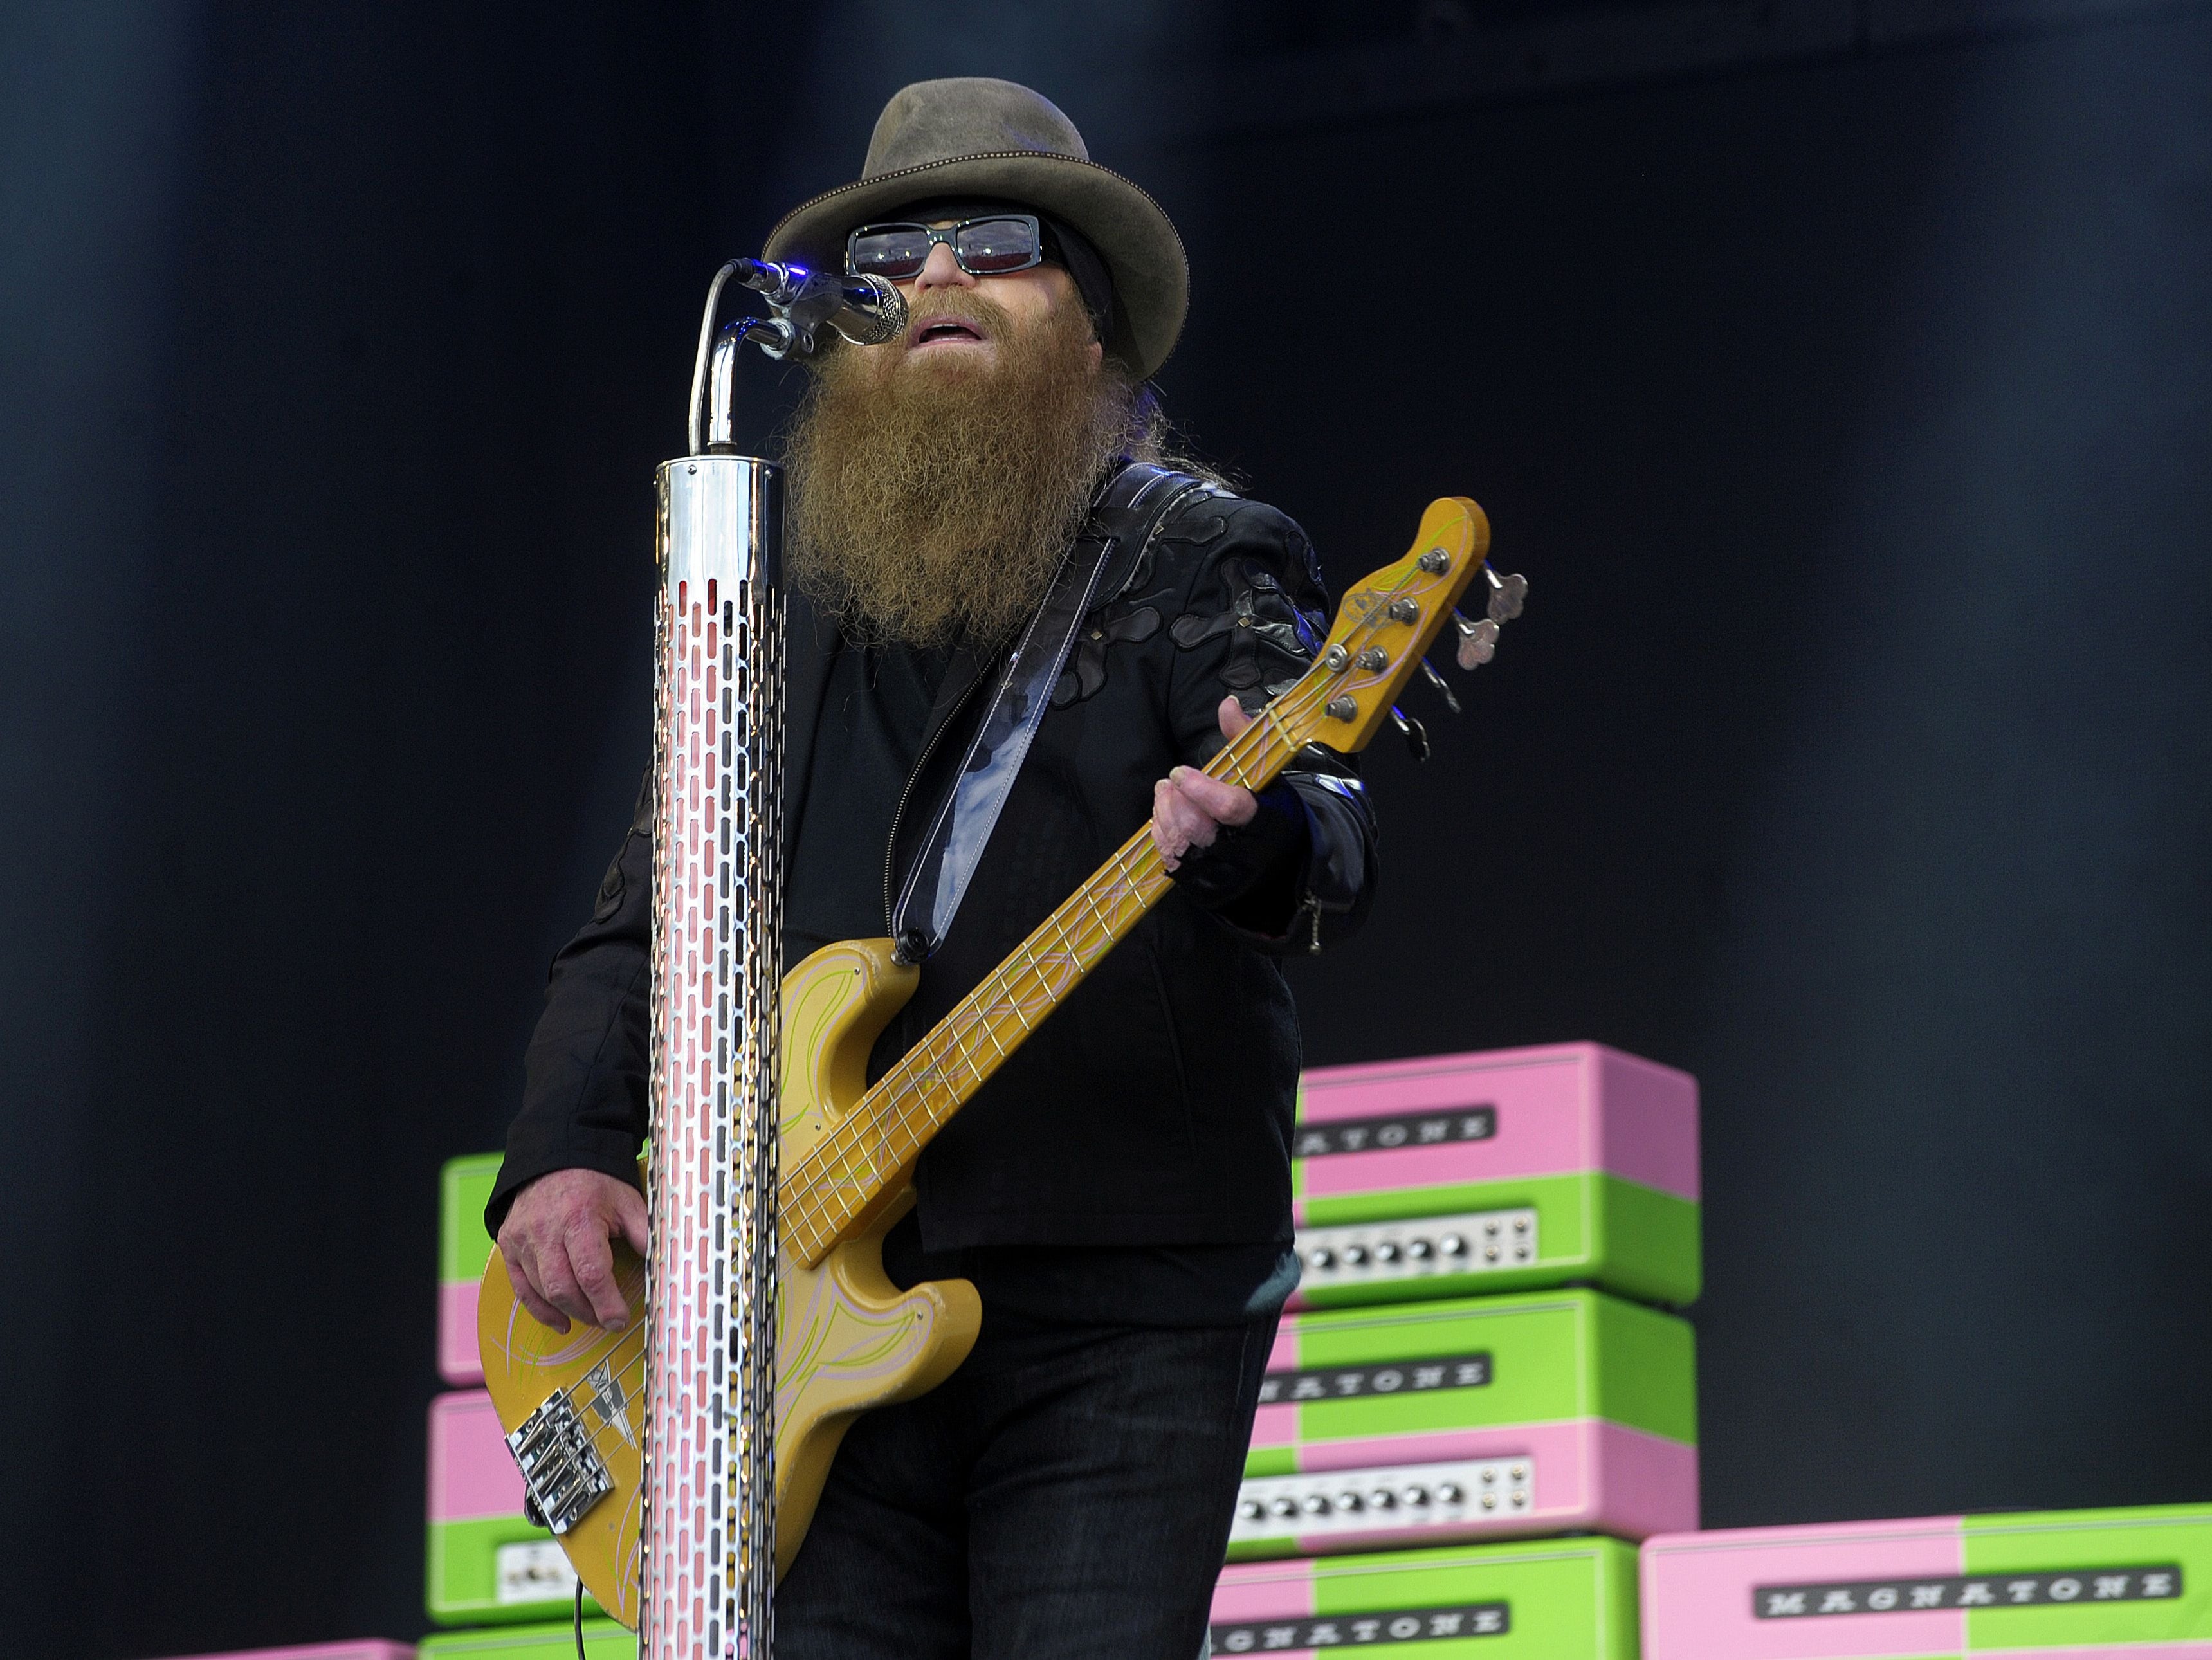 Dusty Hill performs at the Glastonbury Festival on 24 June 2016